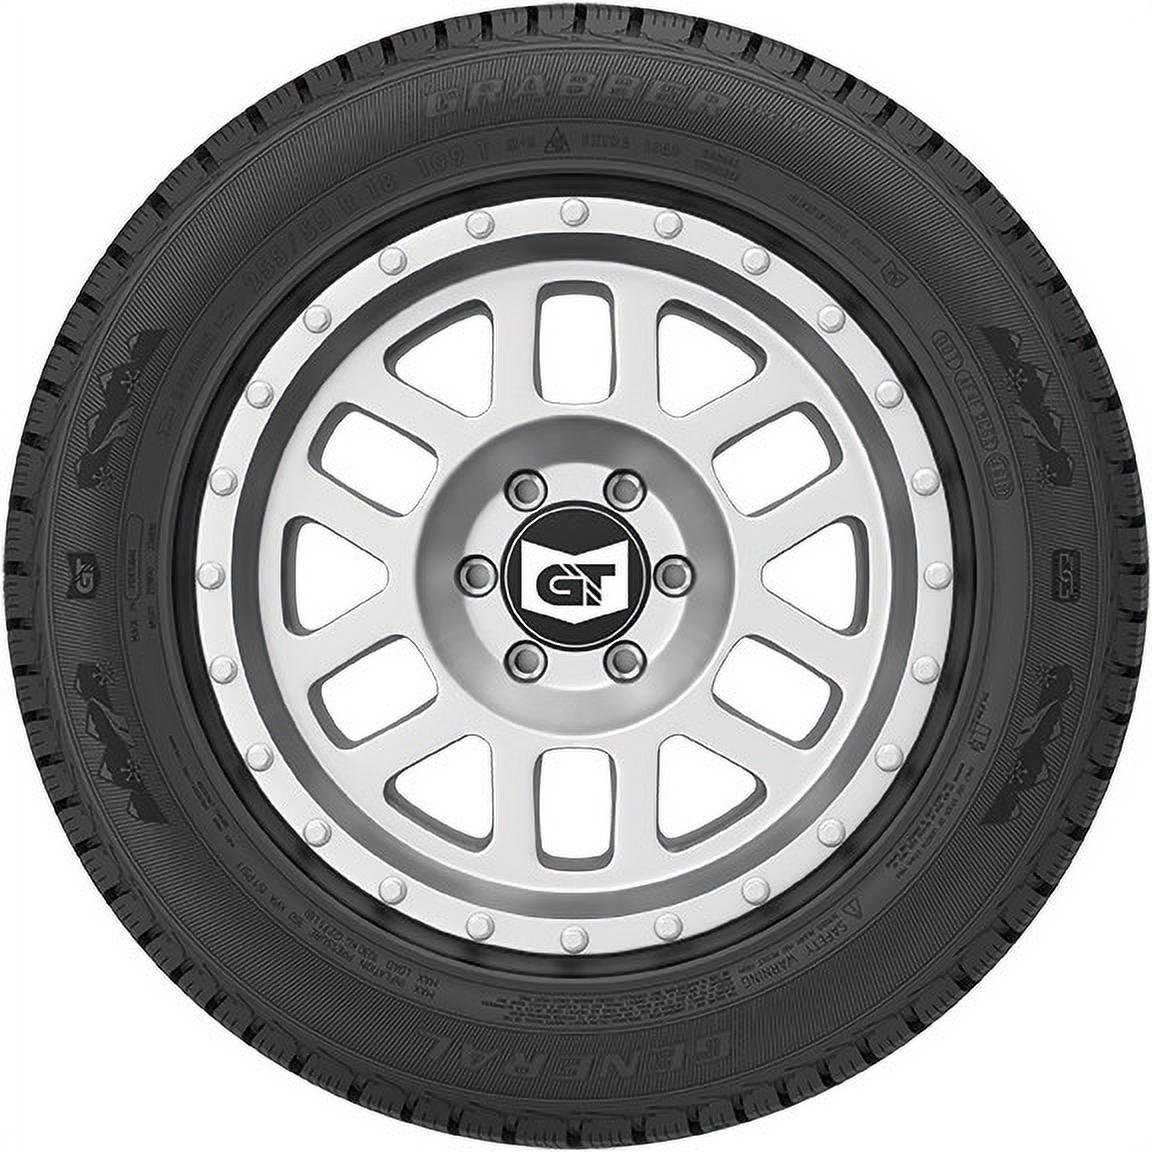 General Grabber AT2 265/70R16 112 S Tire Fits: 2000-06 Toyota Tundra SR5, 2003-04 Ford F-150 Lariat - image 4 of 4